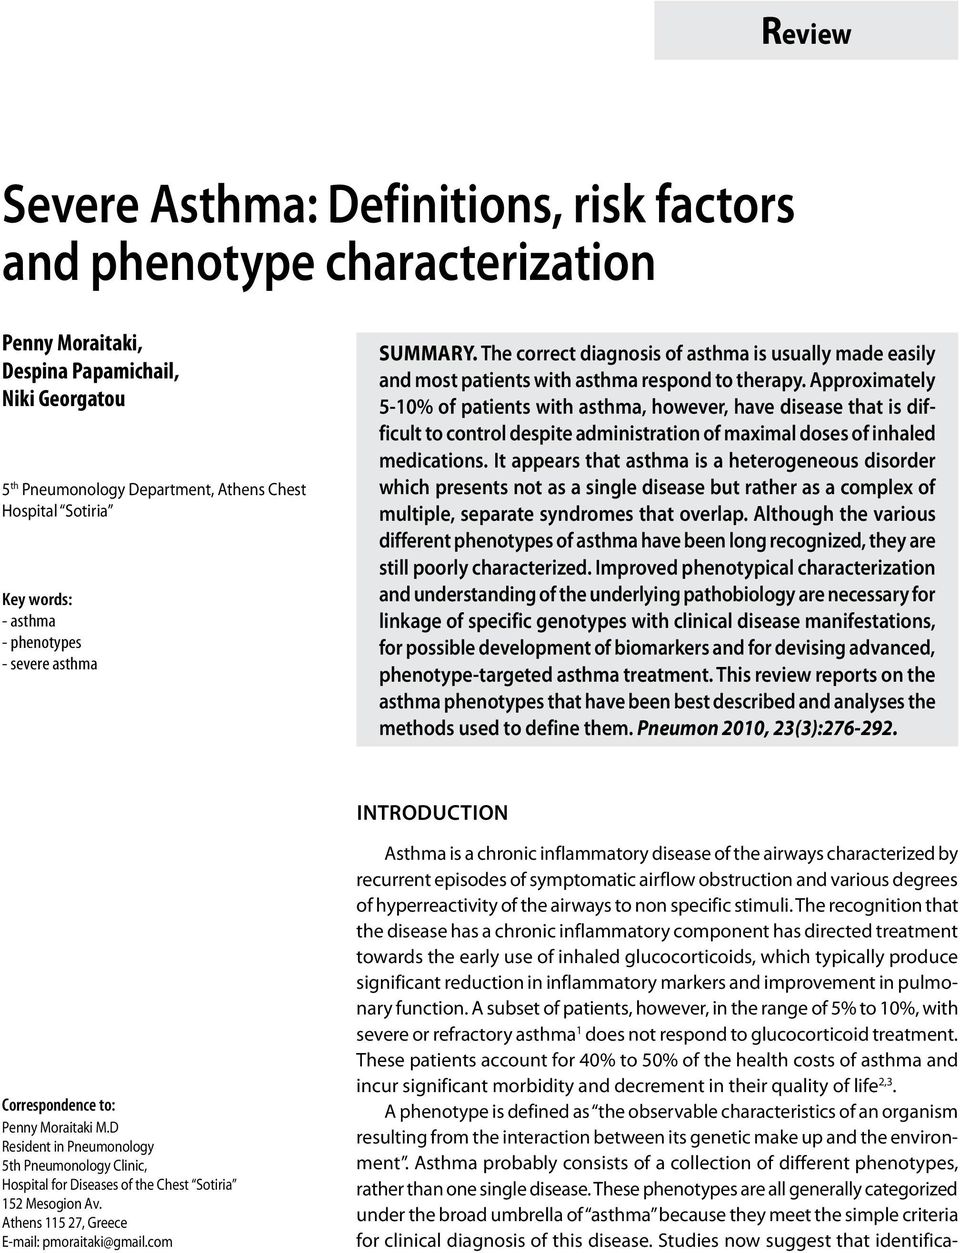 Approximately 5-10% of patients with asthma, however, have disease that is difficult to control despite administration of maximal doses of inhaled medications.